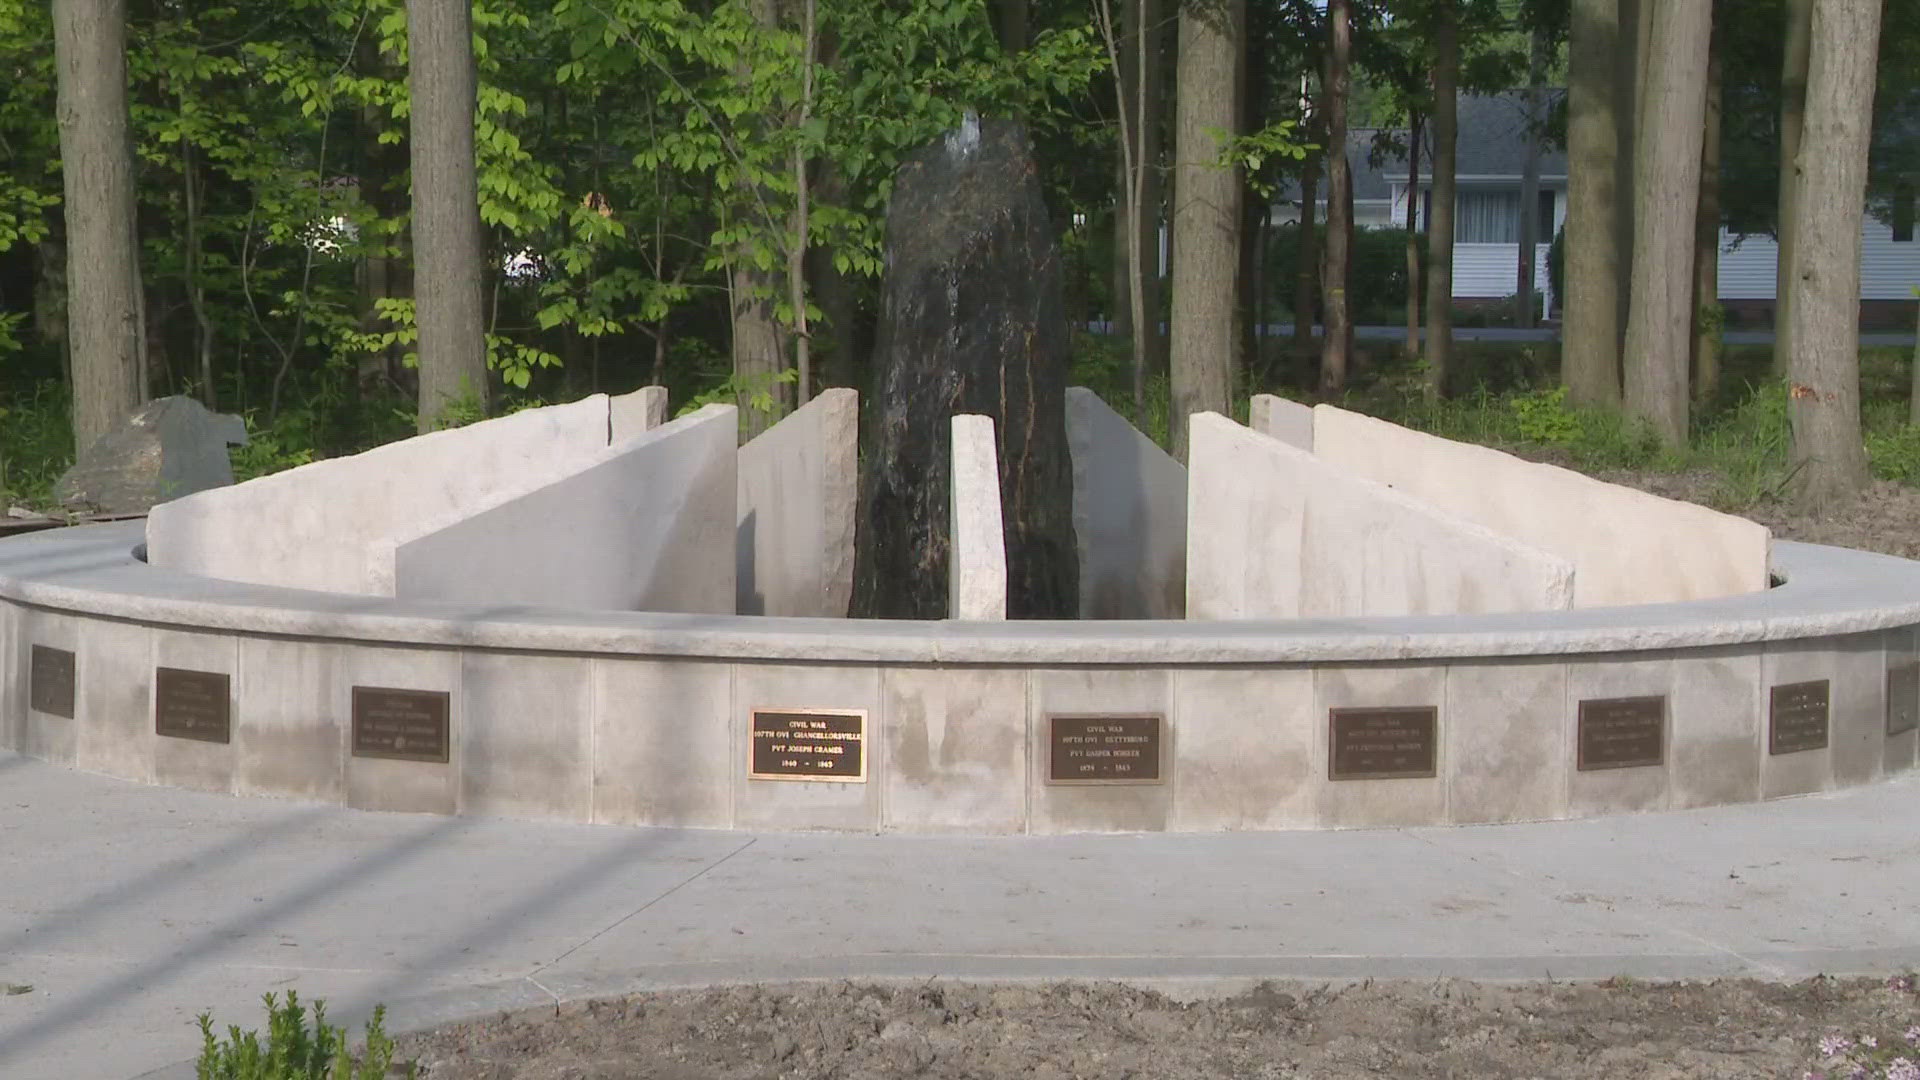 For the first time ever, North Ridgeville has a permanent way to honor veterans on this Memorial Day.